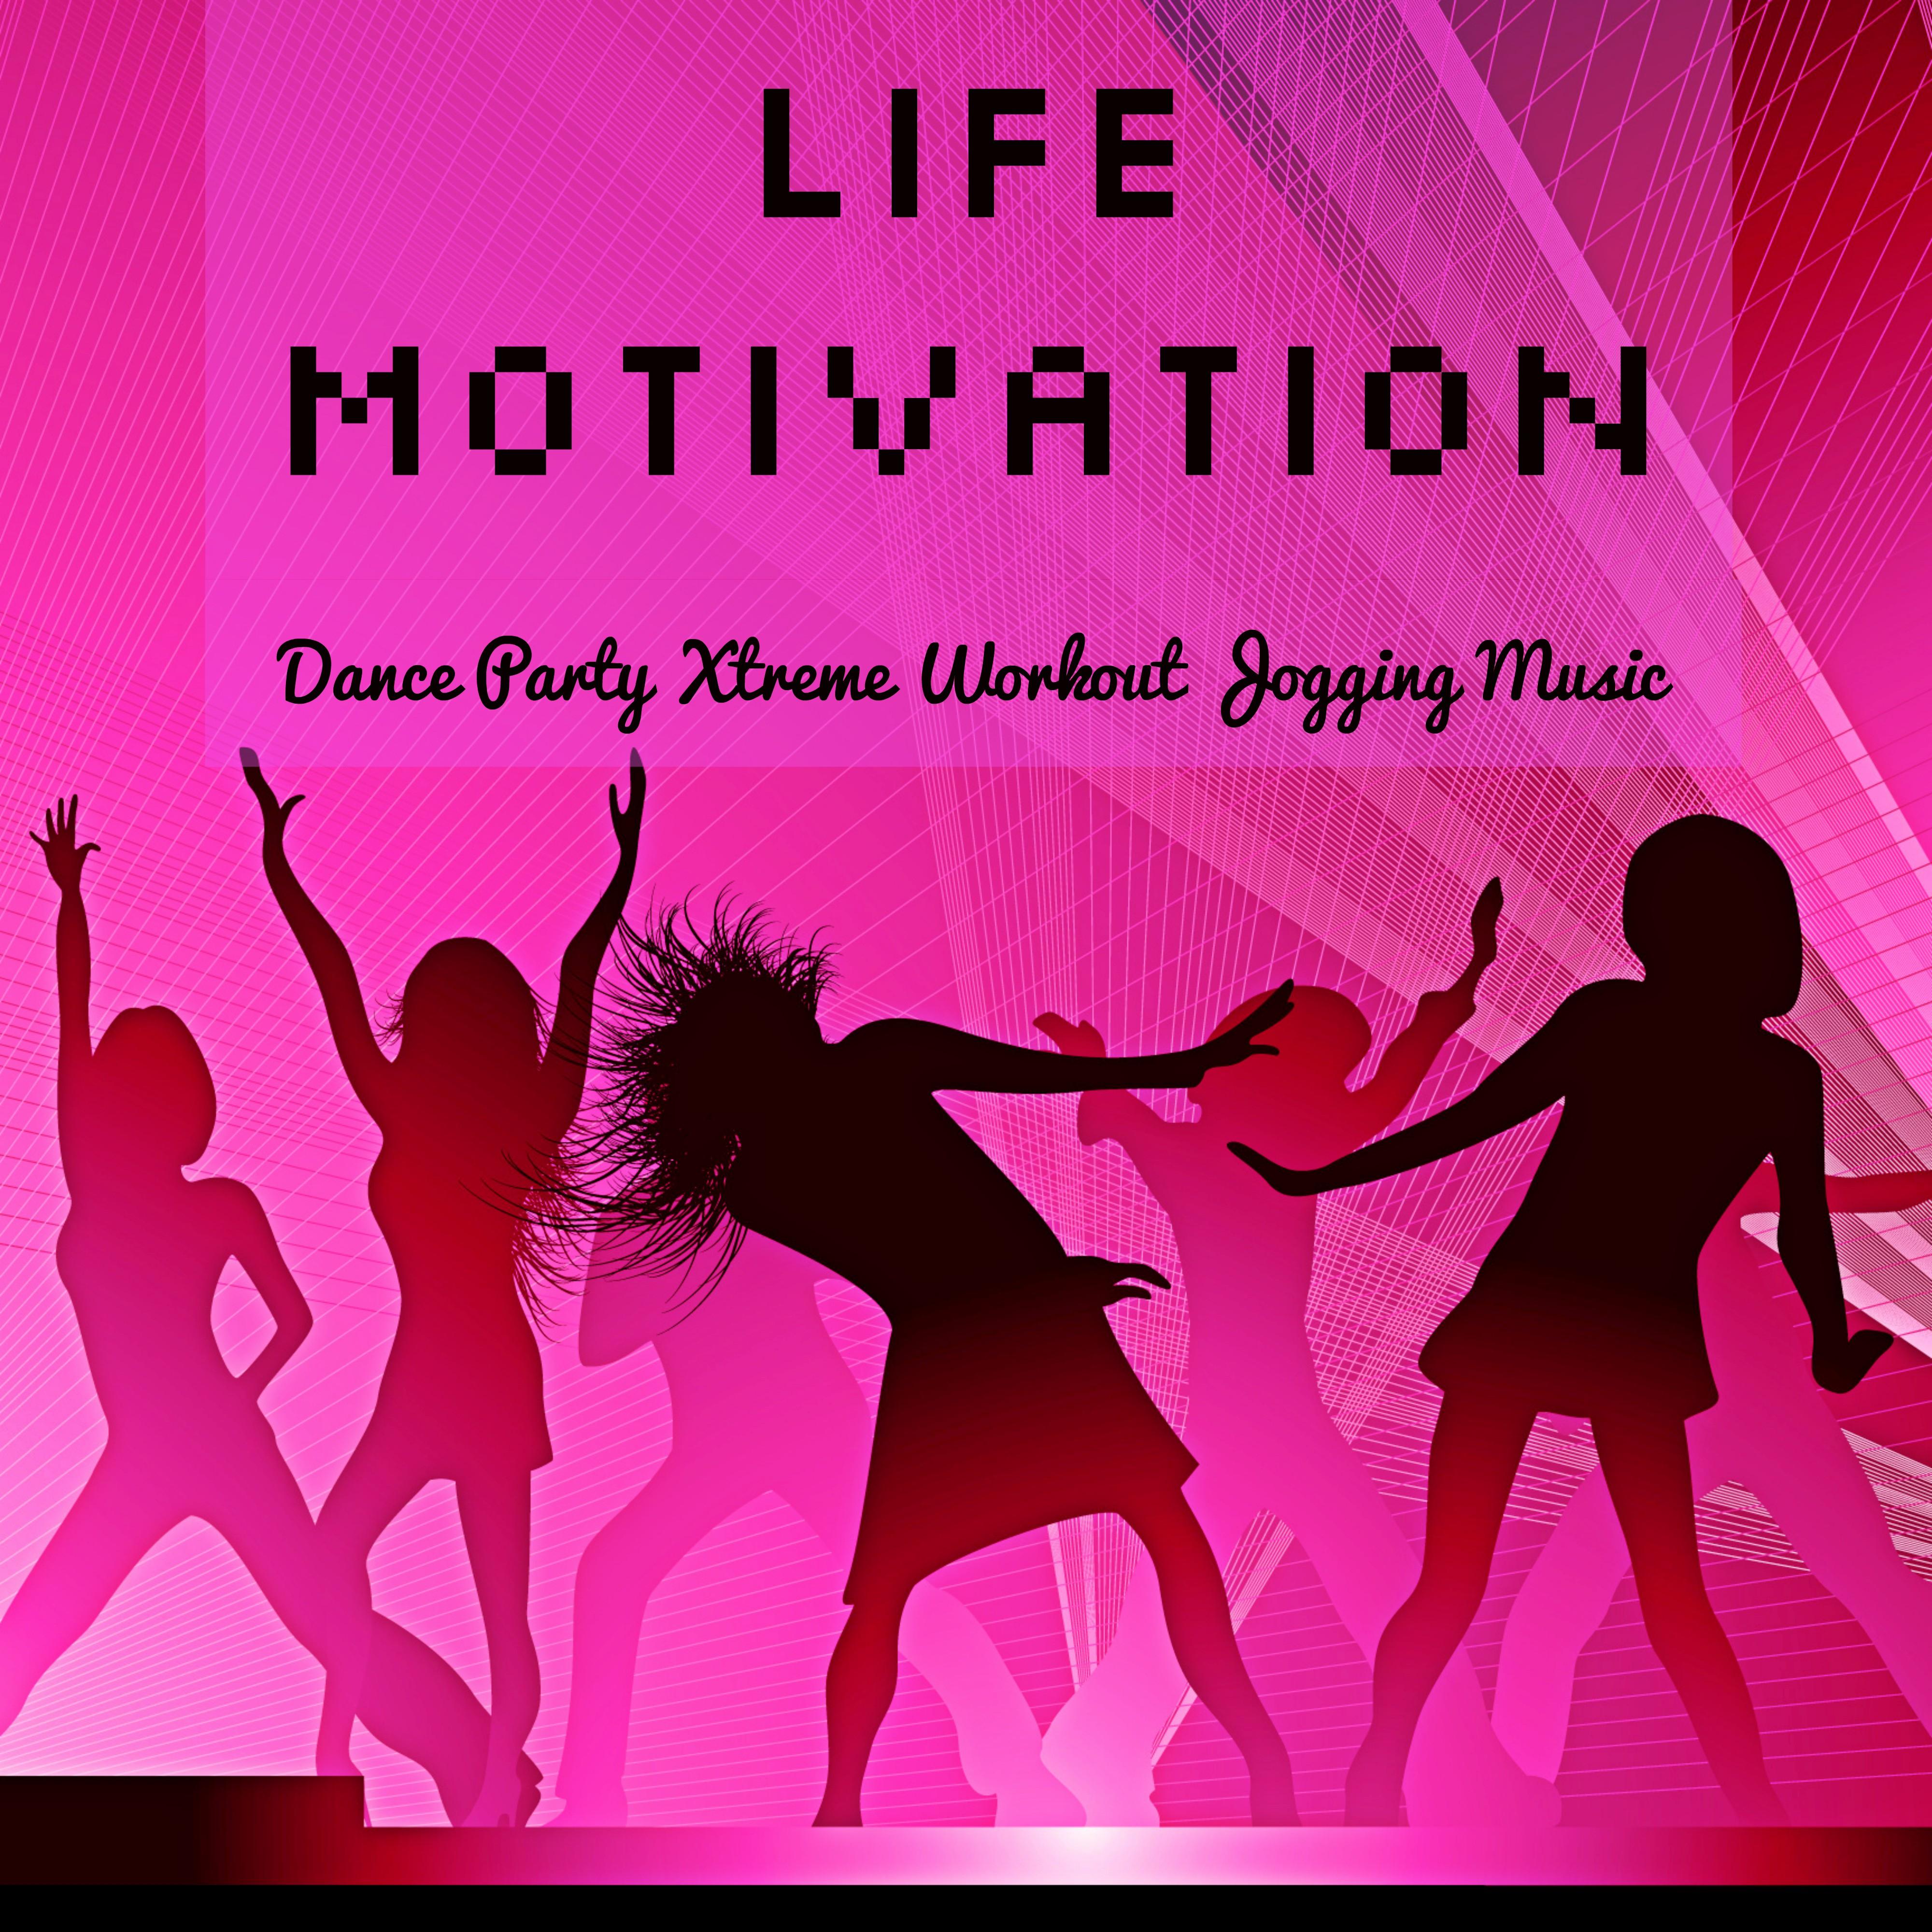 Life Motivation - Dance Party Xtreme Workout Jogging Music with Deep House Soulful Dubstep Electro Sounds